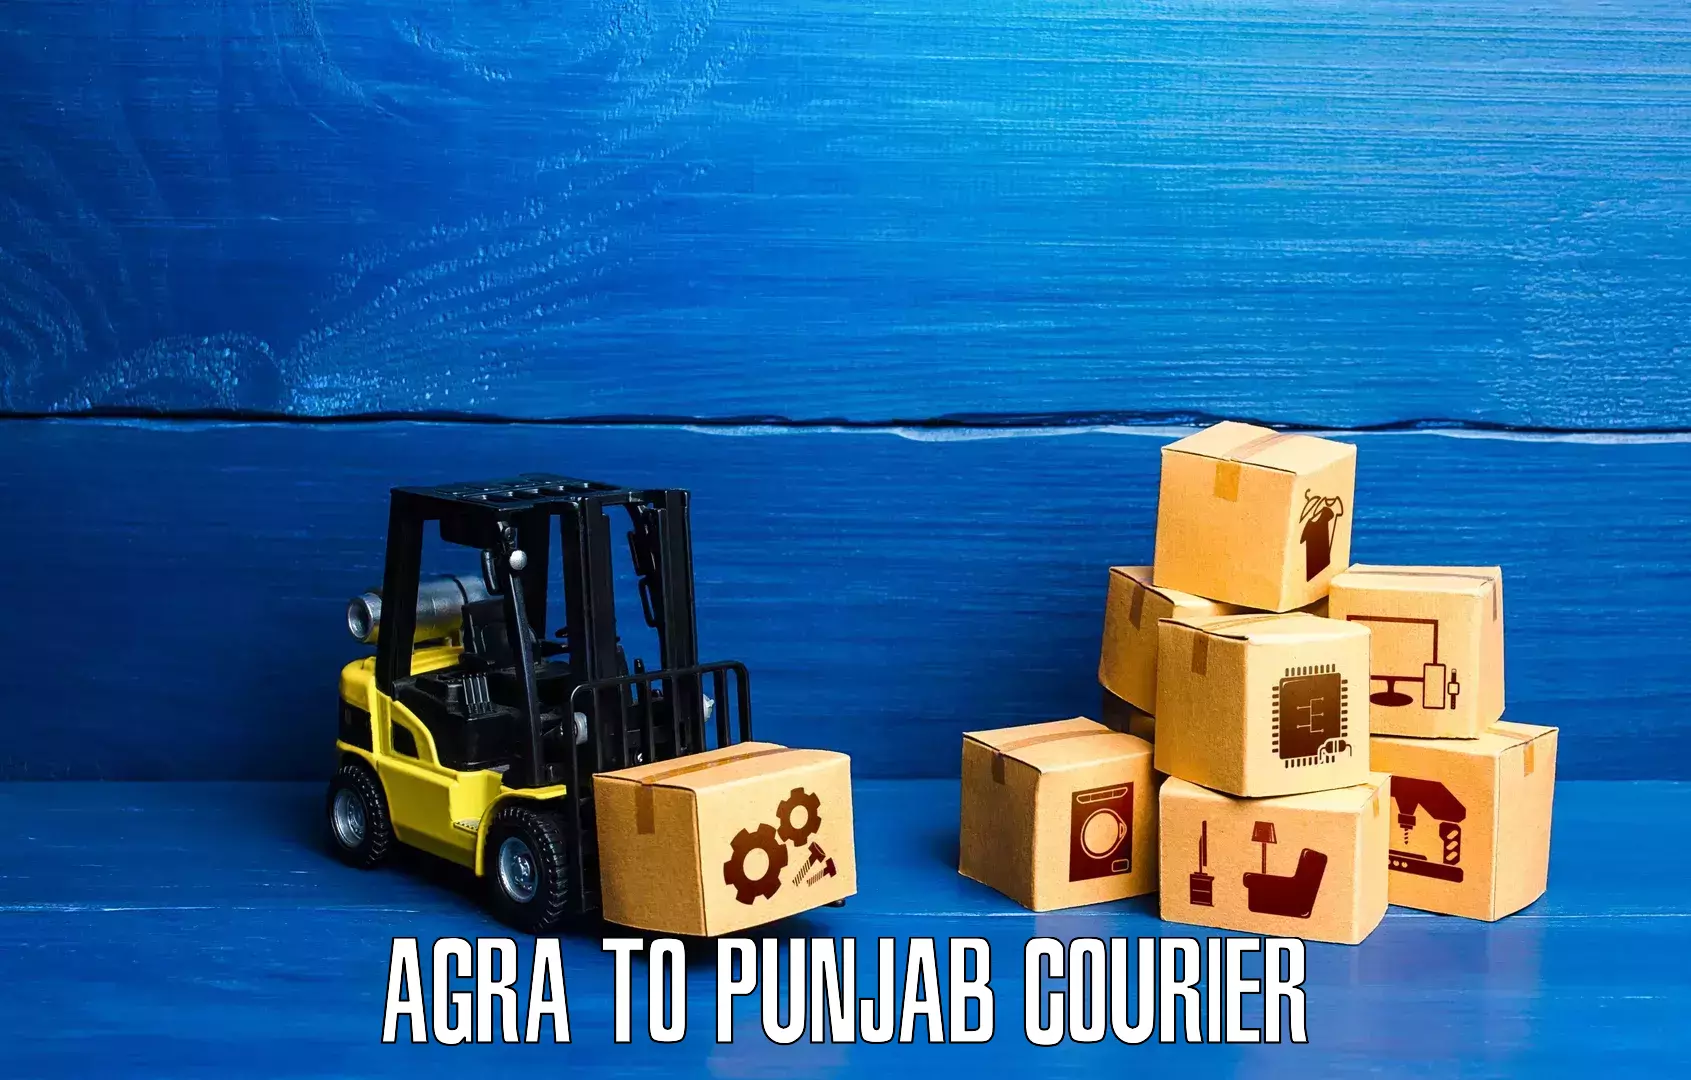 24-hour courier services Agra to Punjab